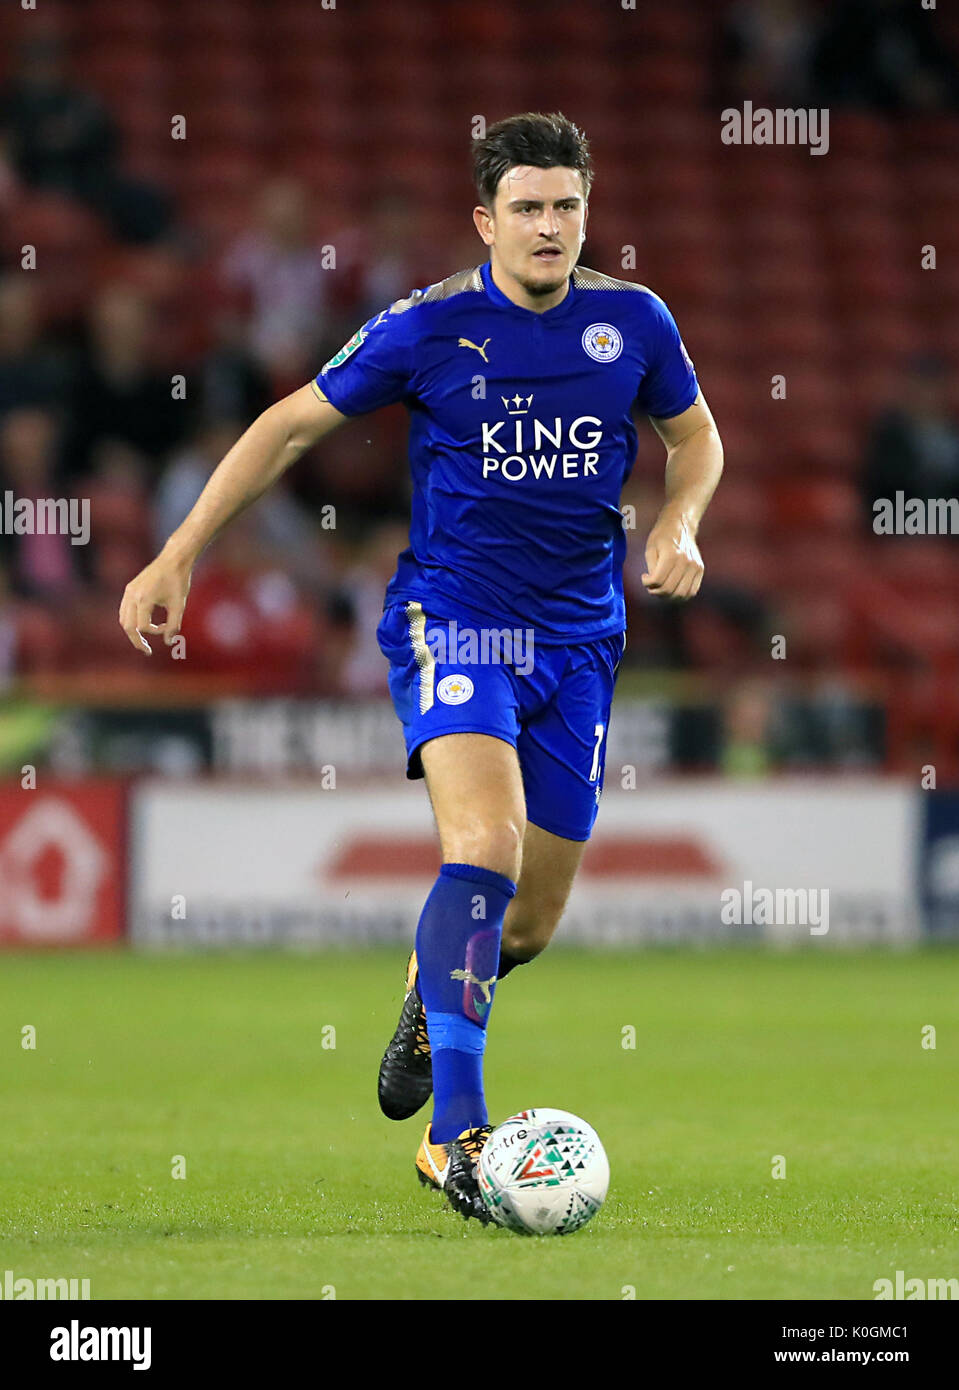 Leicester City's Harry Maguire during the Carabao Cup, Second Round match at Bramall Lane, Sheffield. PRESS ASSOCIATION Photo. Picture date: Tuesday August 22, 2017. See PA story SOCCER Sheff Utd. Photo credit should read: Tim Goode/PA Wire. RESTRICTIONS: No use with unauthorised audio, video, data, fixture lists, club/league logos or 'live' services. Online in-match use limited to 75 images, no video emulation. No use in betting, games or single club/league/player publications. Stock Photo